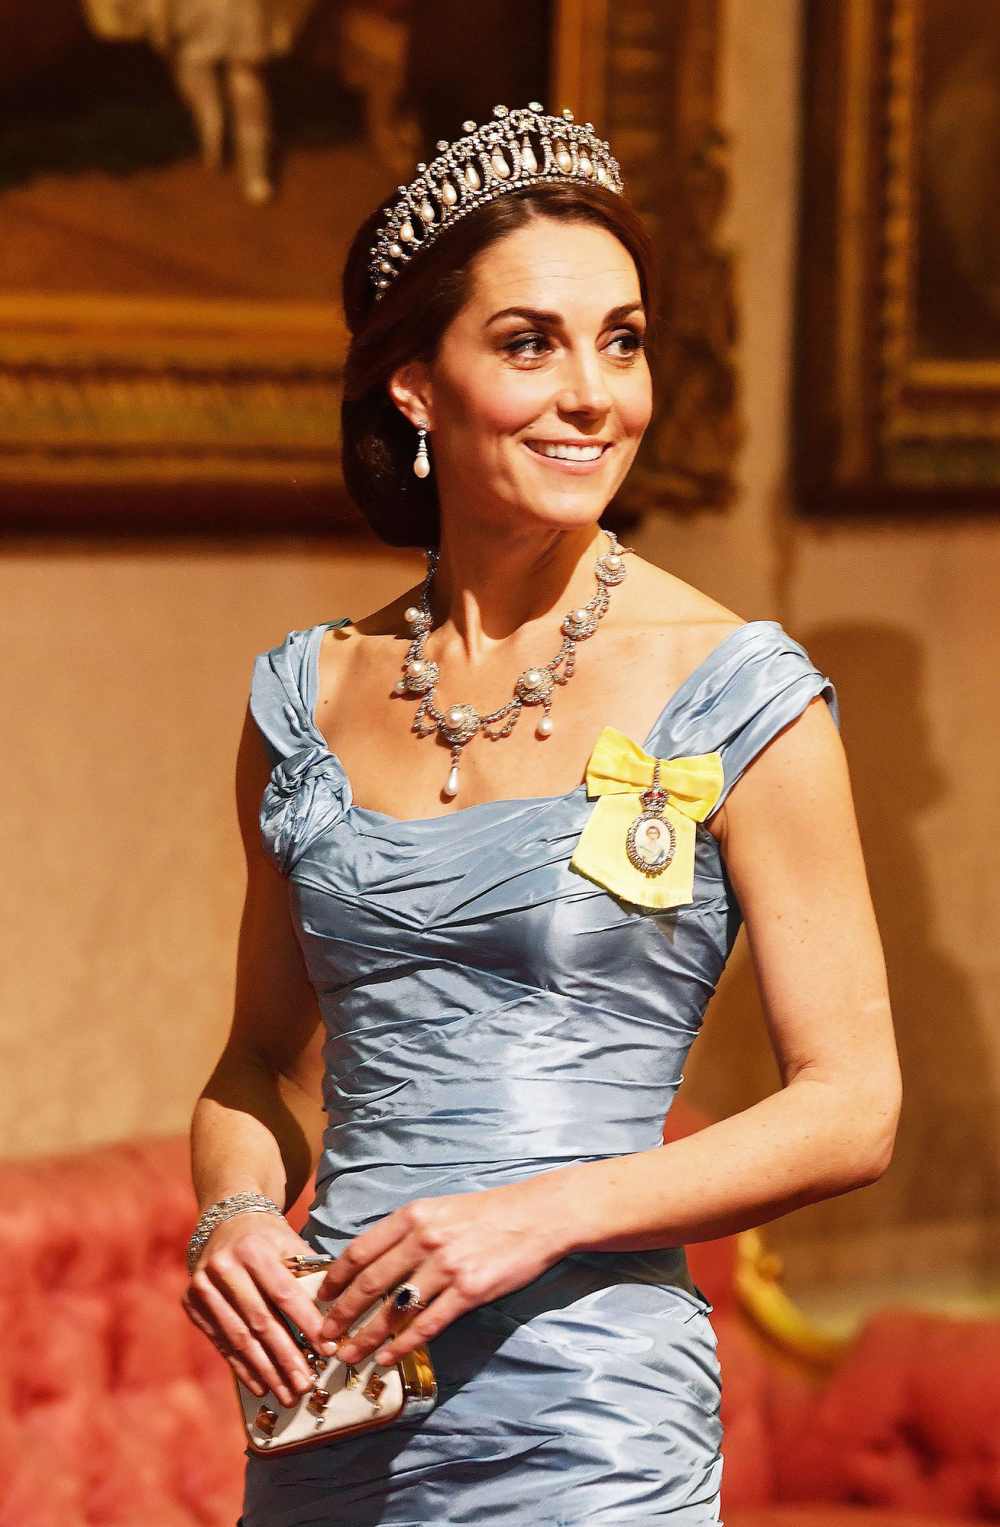 Kate Middleton to Wear Diamond Consort Crown as Queen: Details